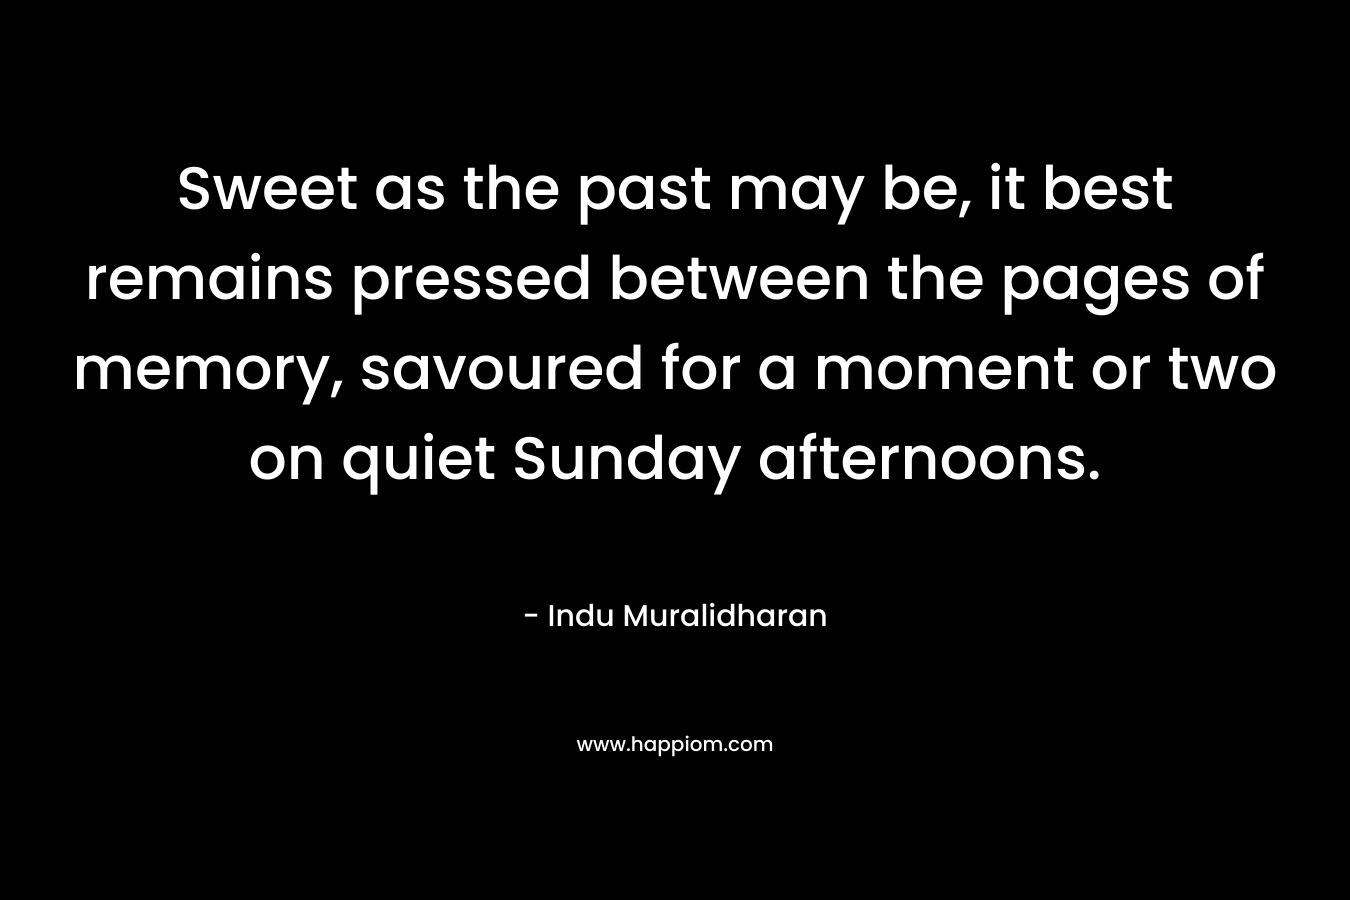 Sweet as the past may be, it best remains pressed between the pages of memory, savoured for a moment or two on quiet Sunday afternoons.